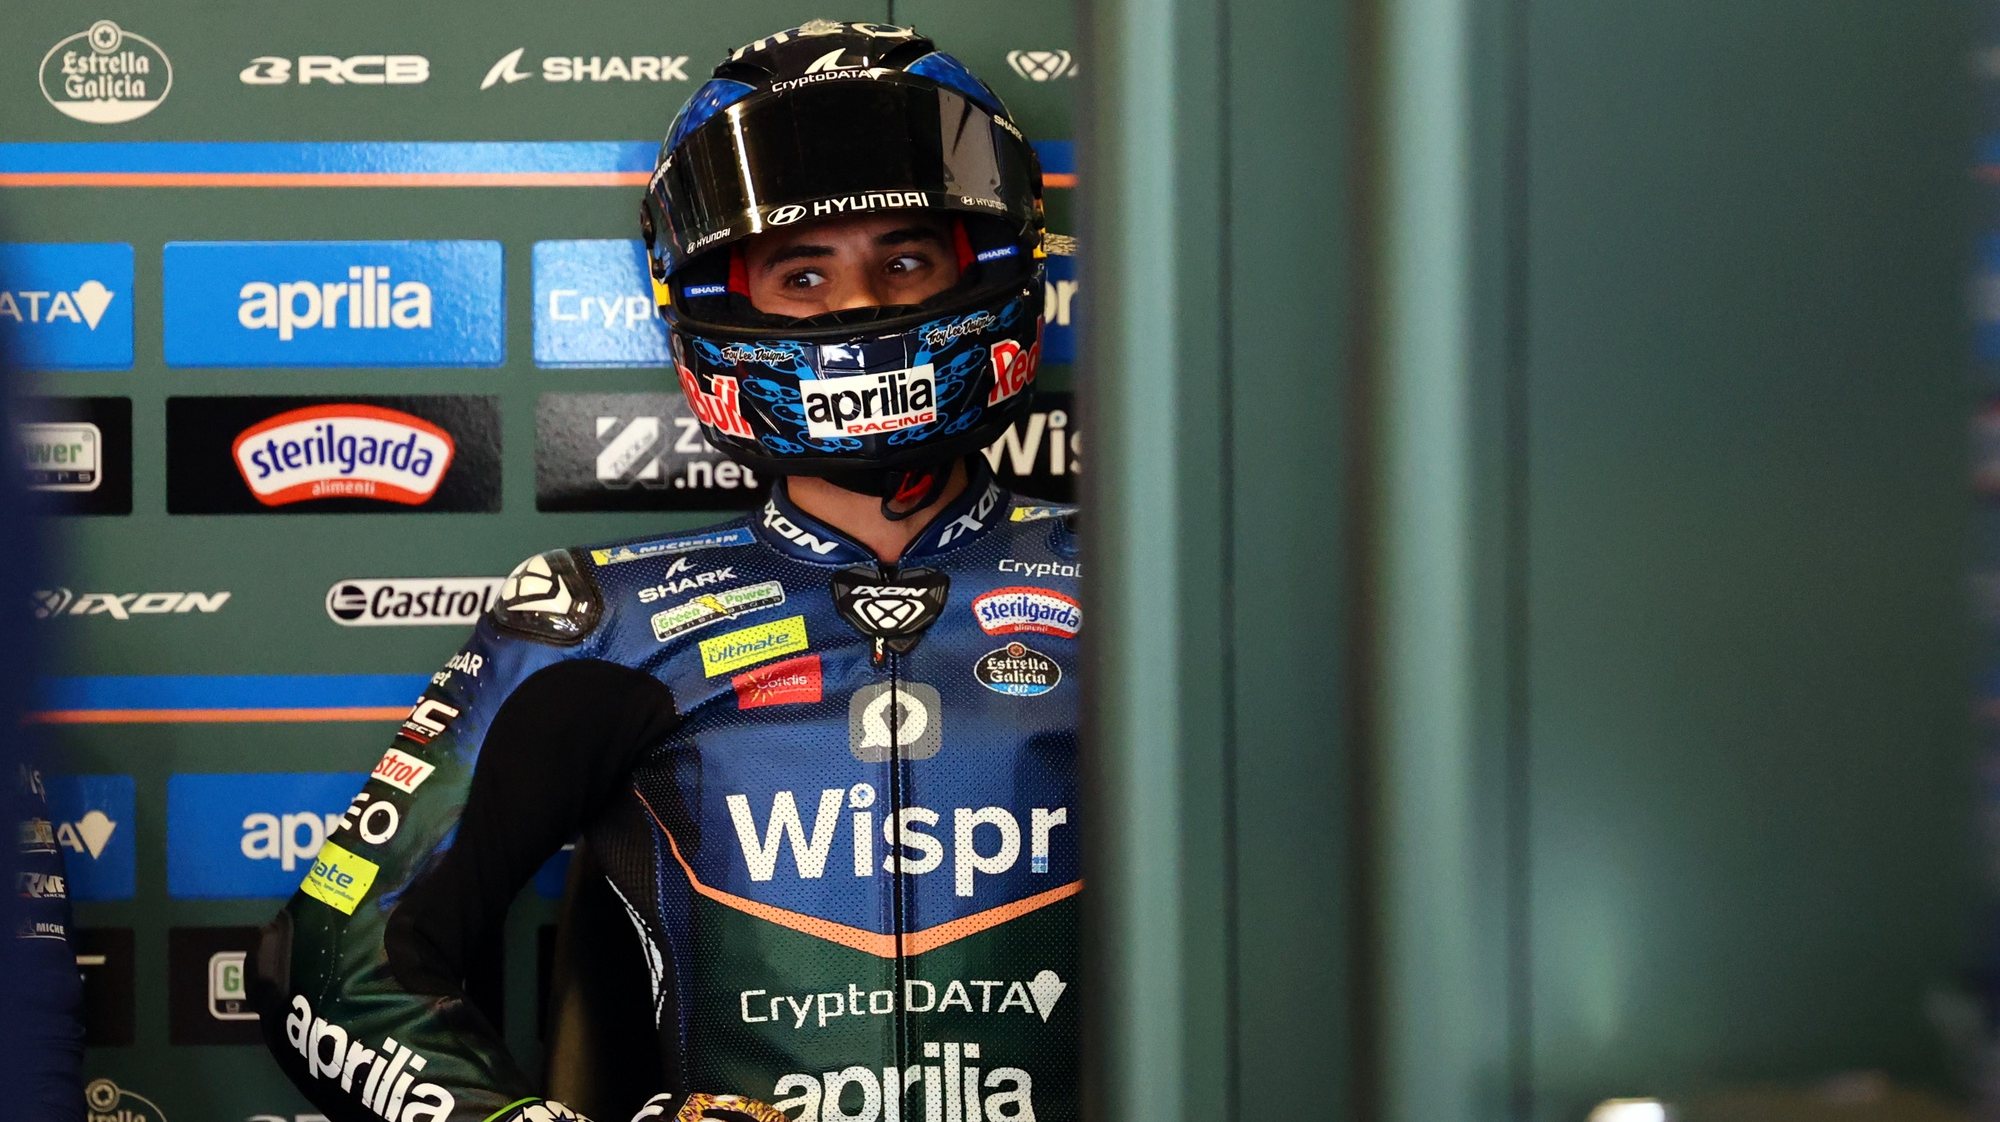 Portuguese MotoGP rider Miguel Oliveira, of CryptoDATA RNF MotoGP Team, at the paddock moments before the first practice session for the Motorcycling Grand Prix of Portugal at Algarve International race track, south of Portugal, 24 March 2023. The Motorcycling Grand Prix of Portugal will take place on 26 March 2023. NUNO VEIGA/LUSA